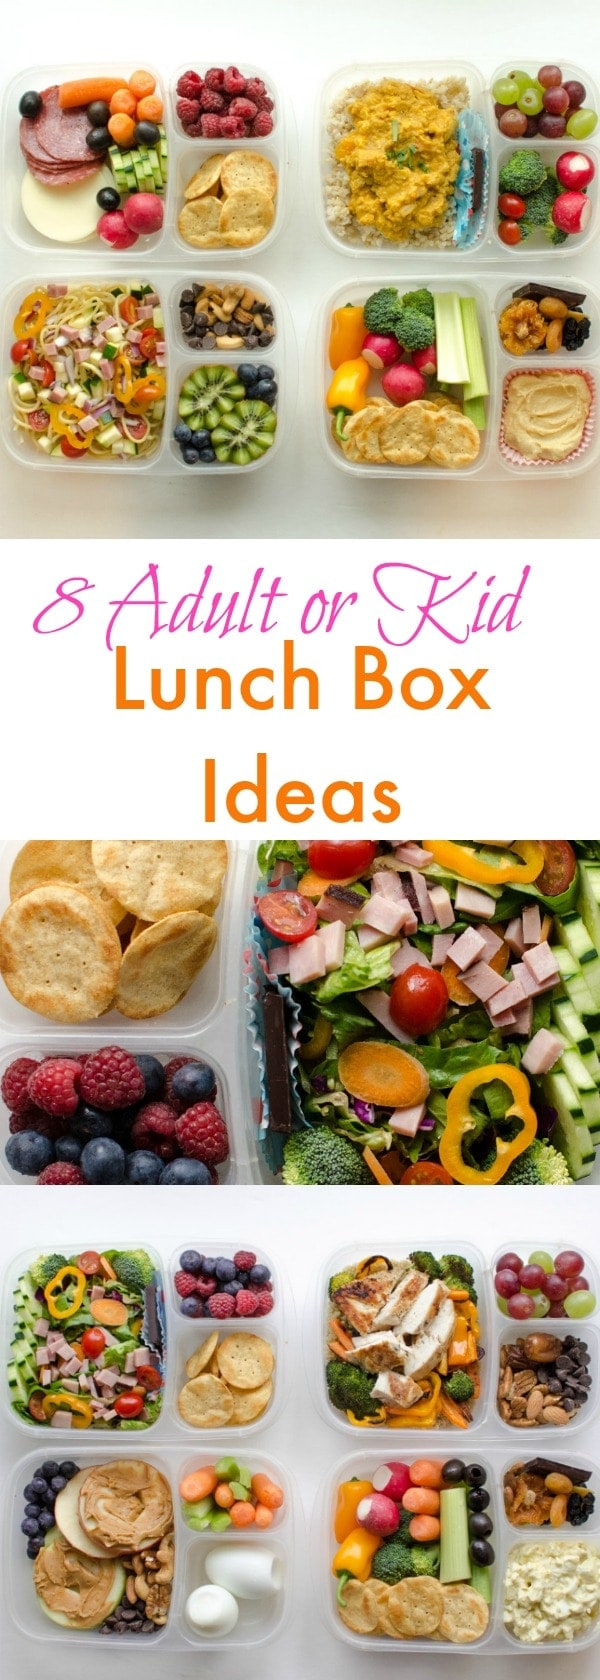 10 Most Recommended Bento Lunch Box Ideas For Adults 8 adult lunch box ideas healthy easy work lunch ideas 3 2022